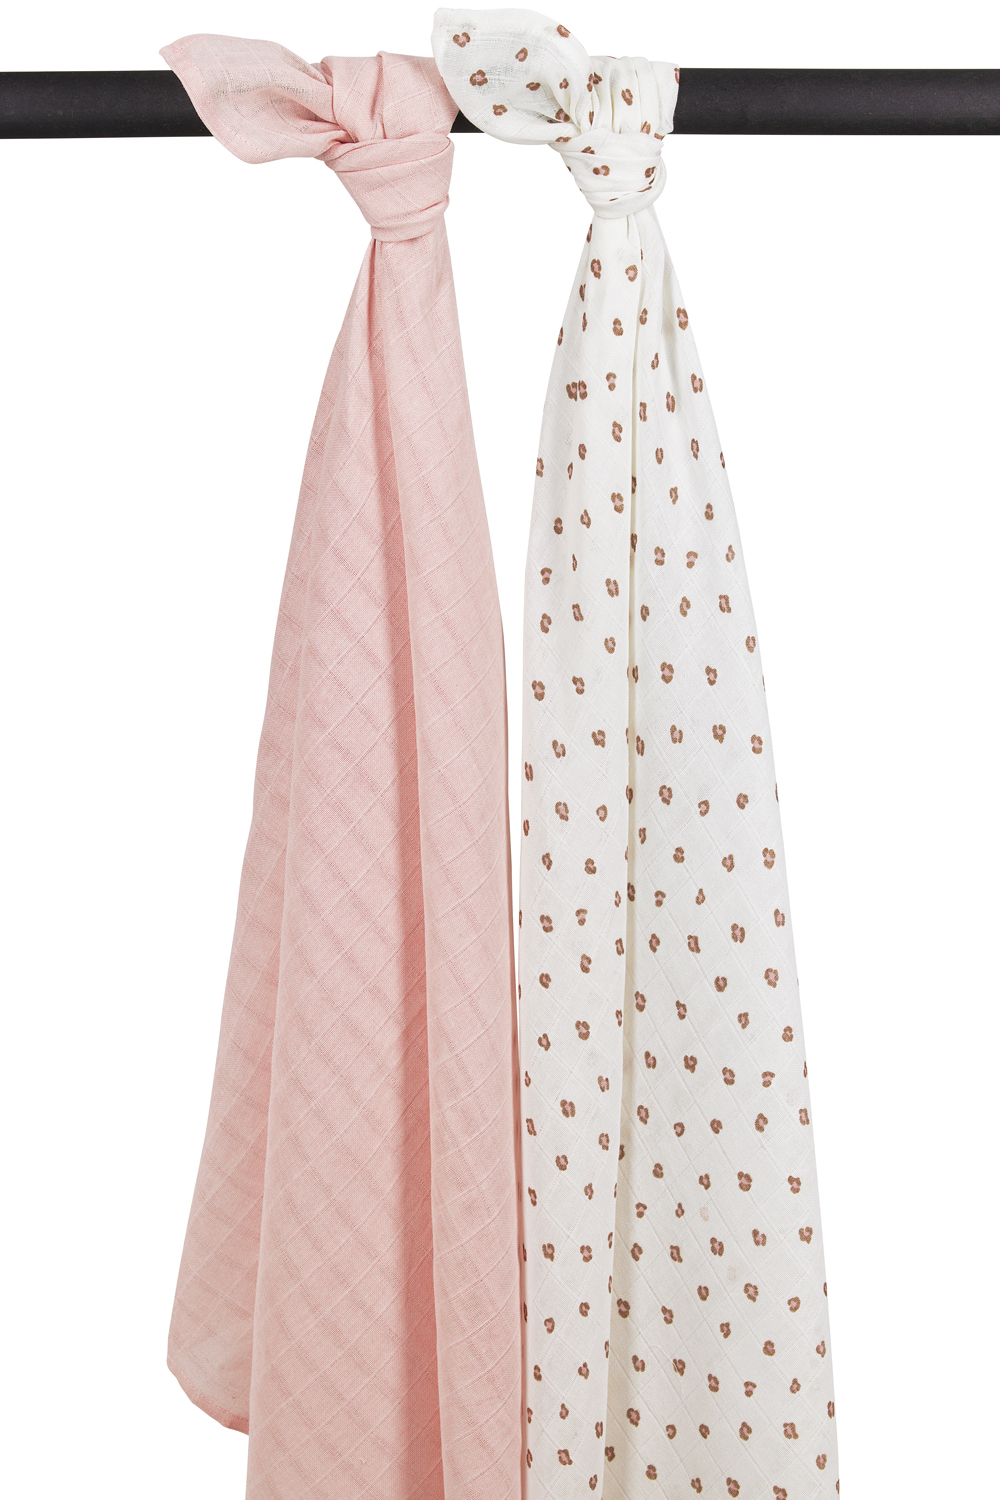 Swaddle  2er pack musselin Mini Panther - soft pink - 120x120cm